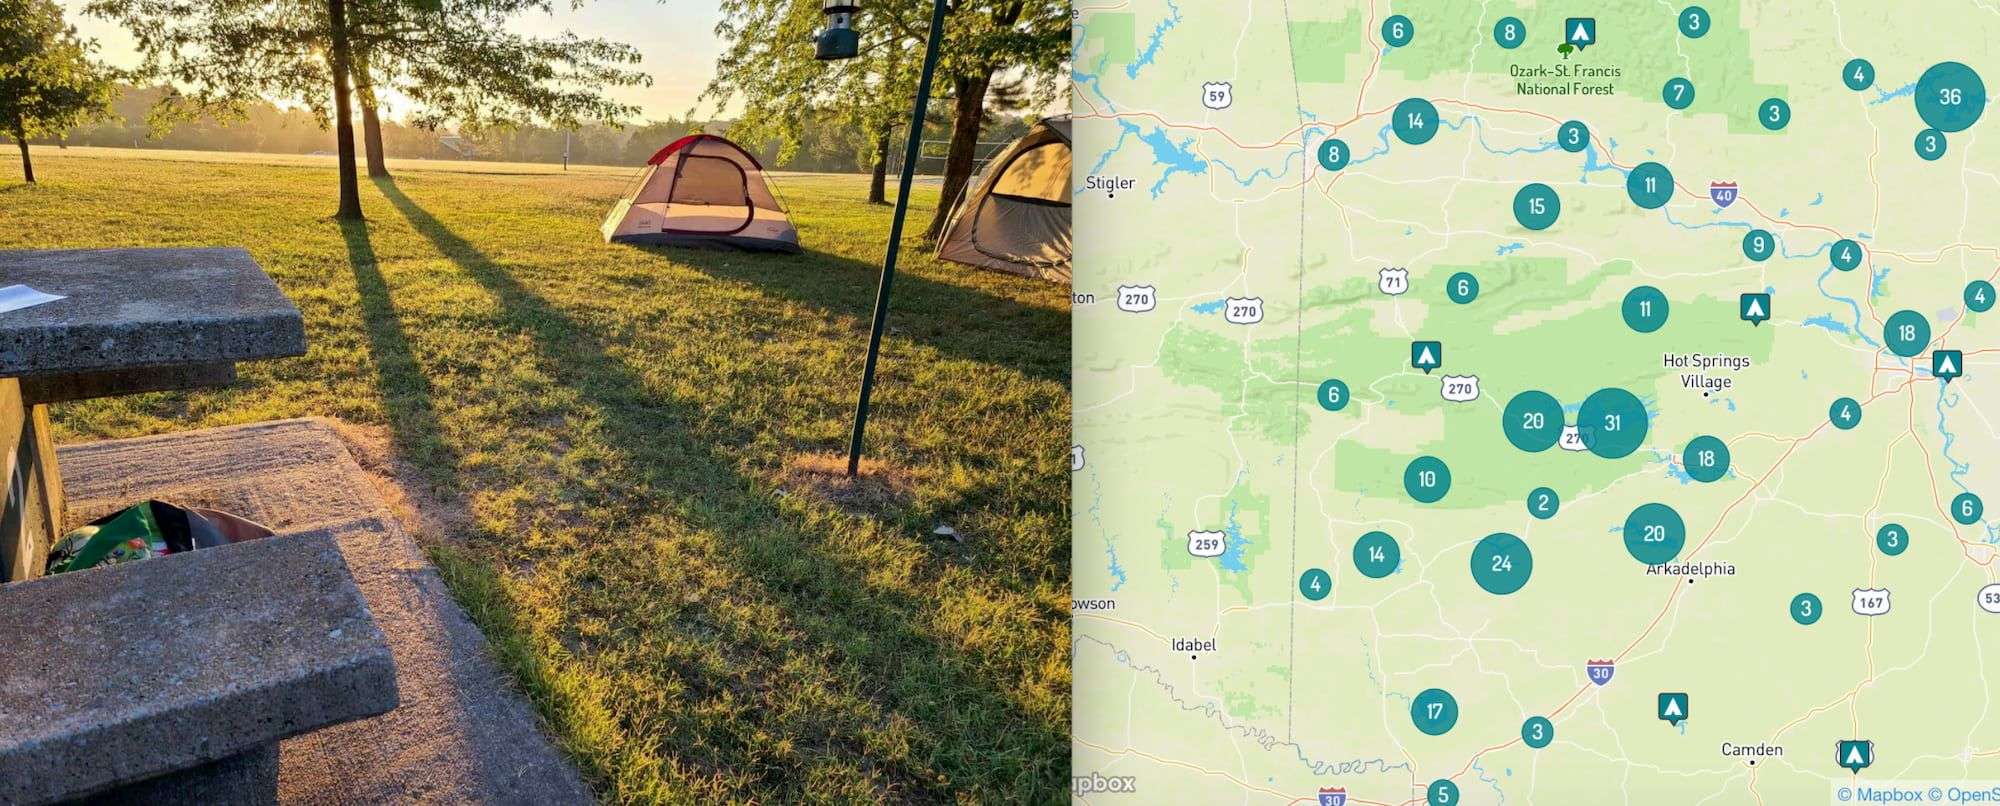 7 Awesome Campgrounds in Northwest ArkansasFt. Smith ...